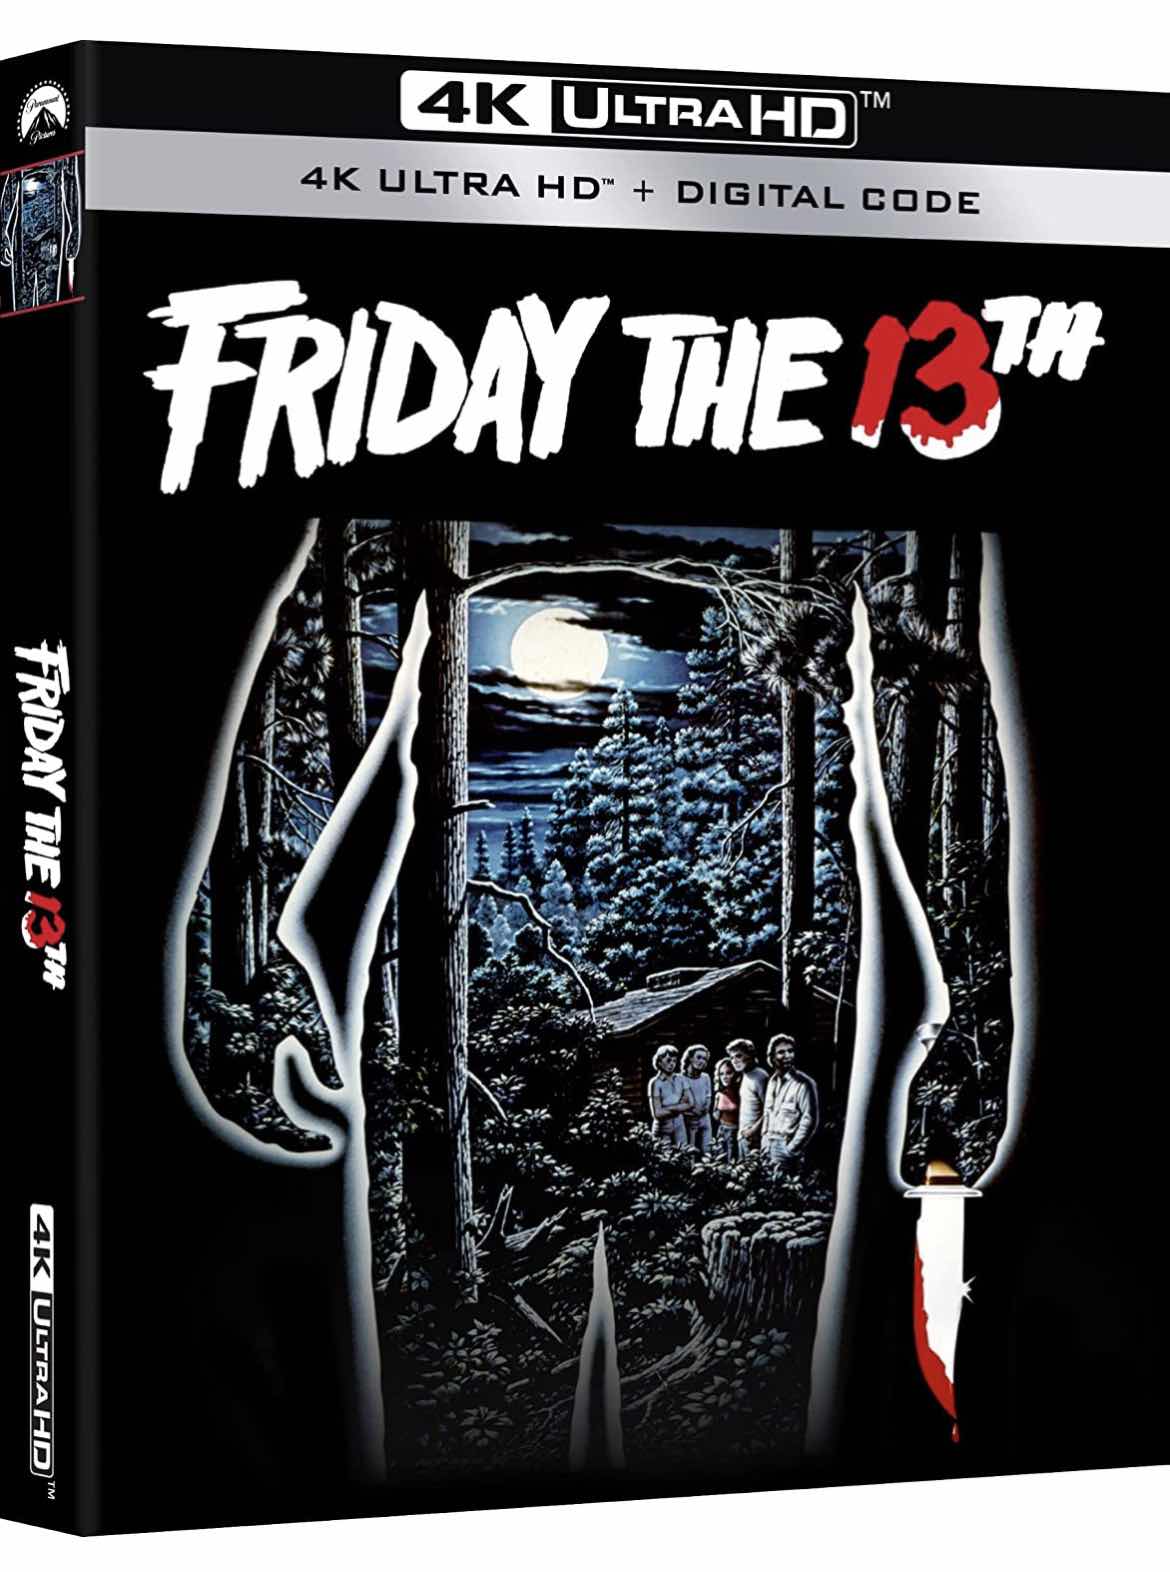 Paramount Releasing 4K UHD Of Friday The 13th 1980